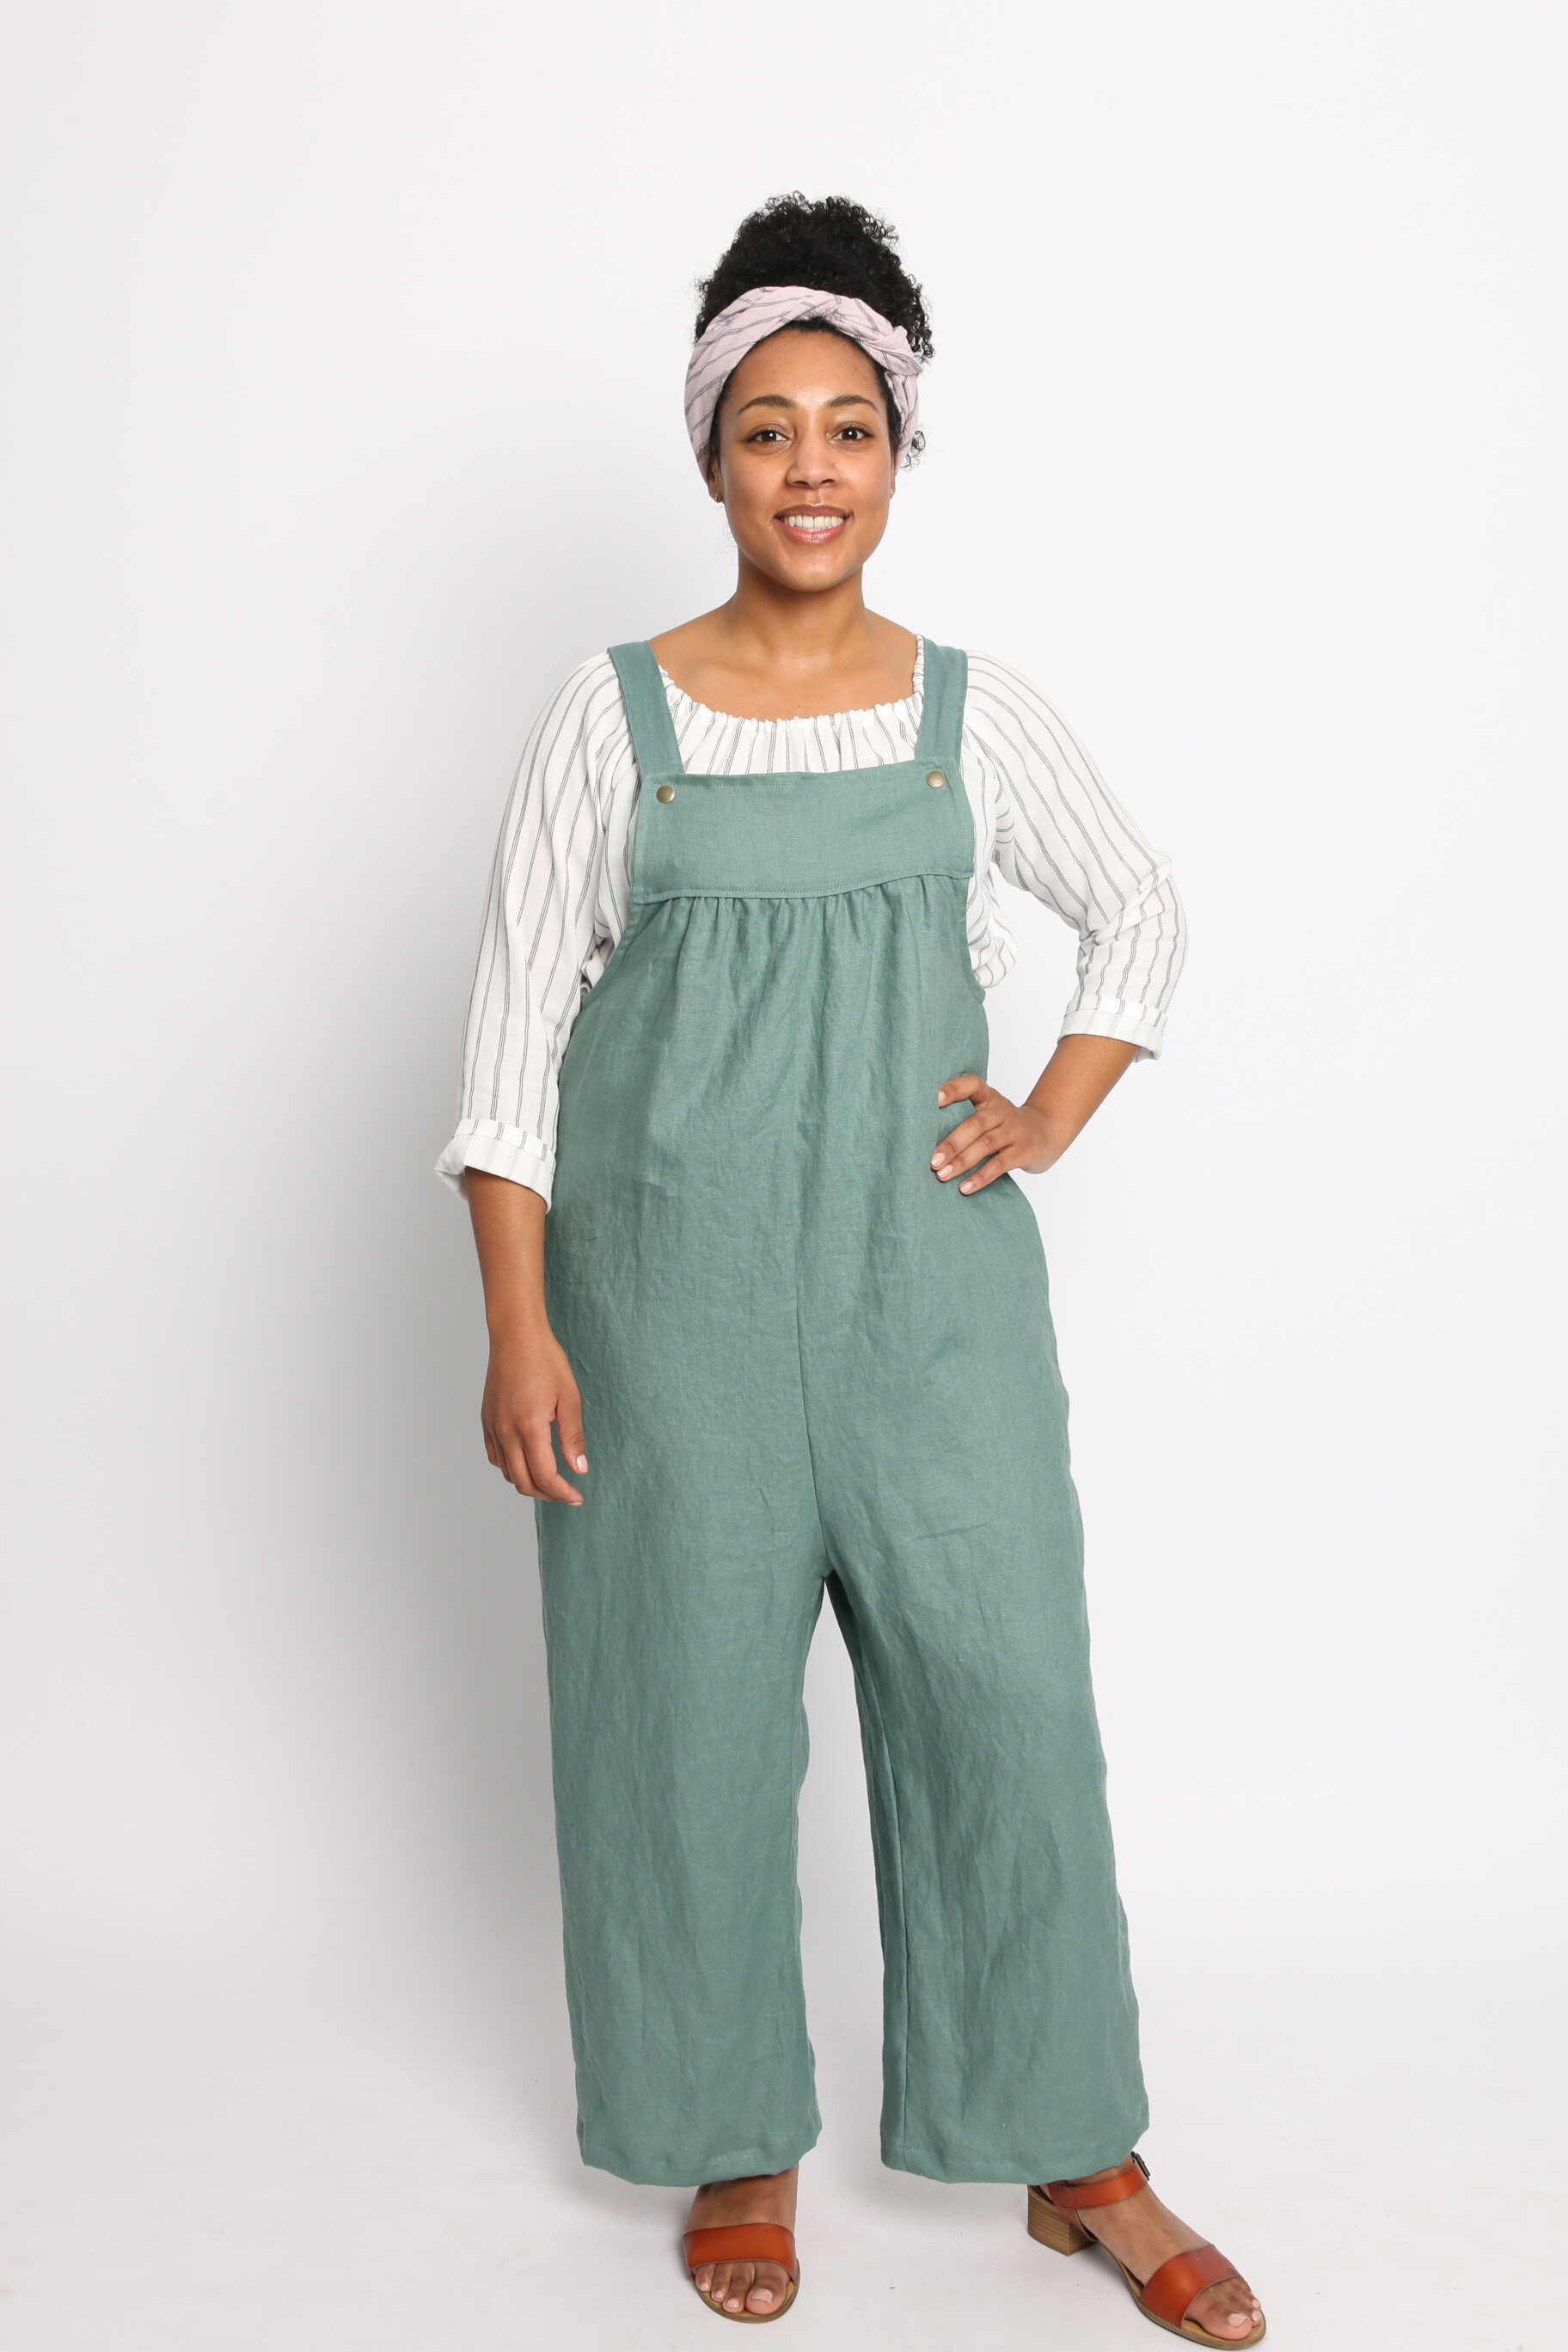 Montreal Overalls - 100% linen. Perfectly flow-y, adjustable straps, and inside pockets.